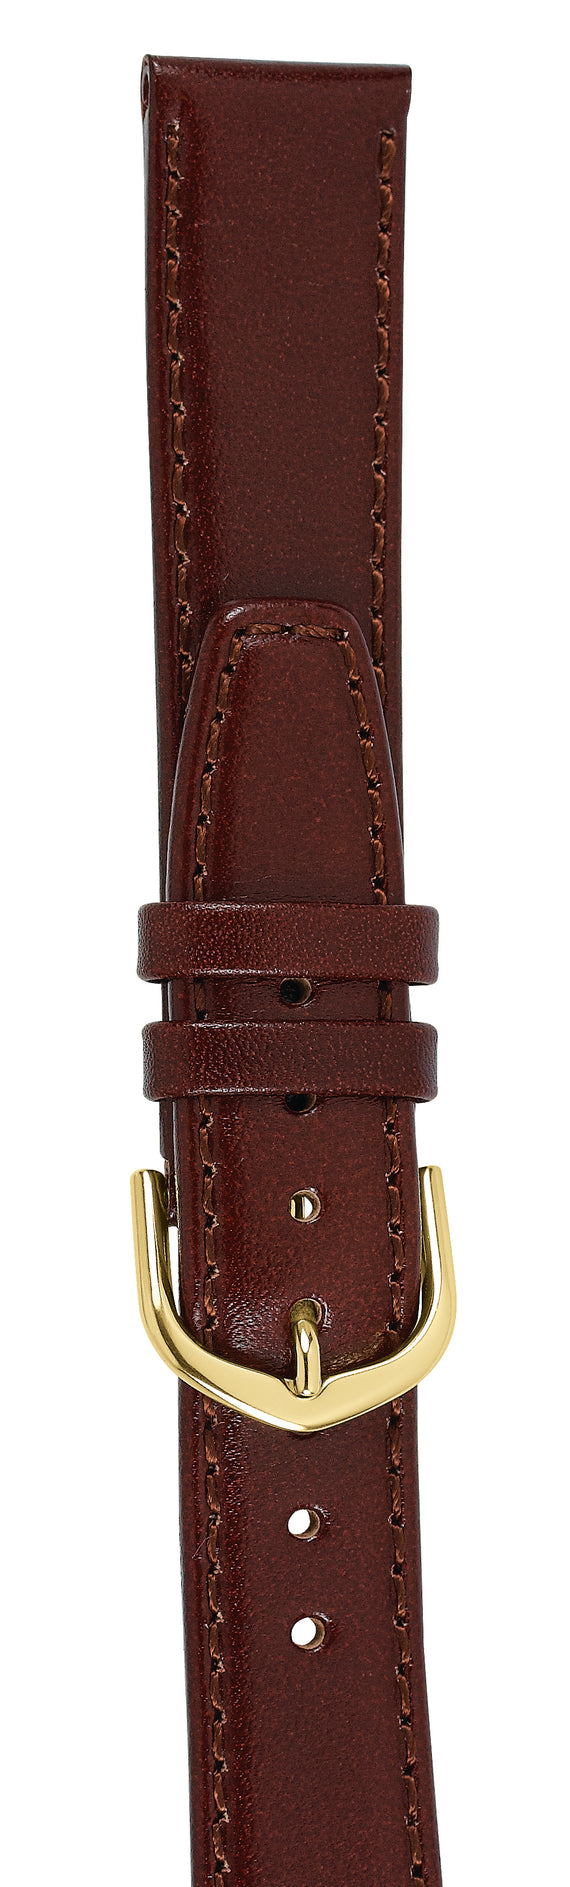 Brown Royal Calf Leather Watch Strap 22mm